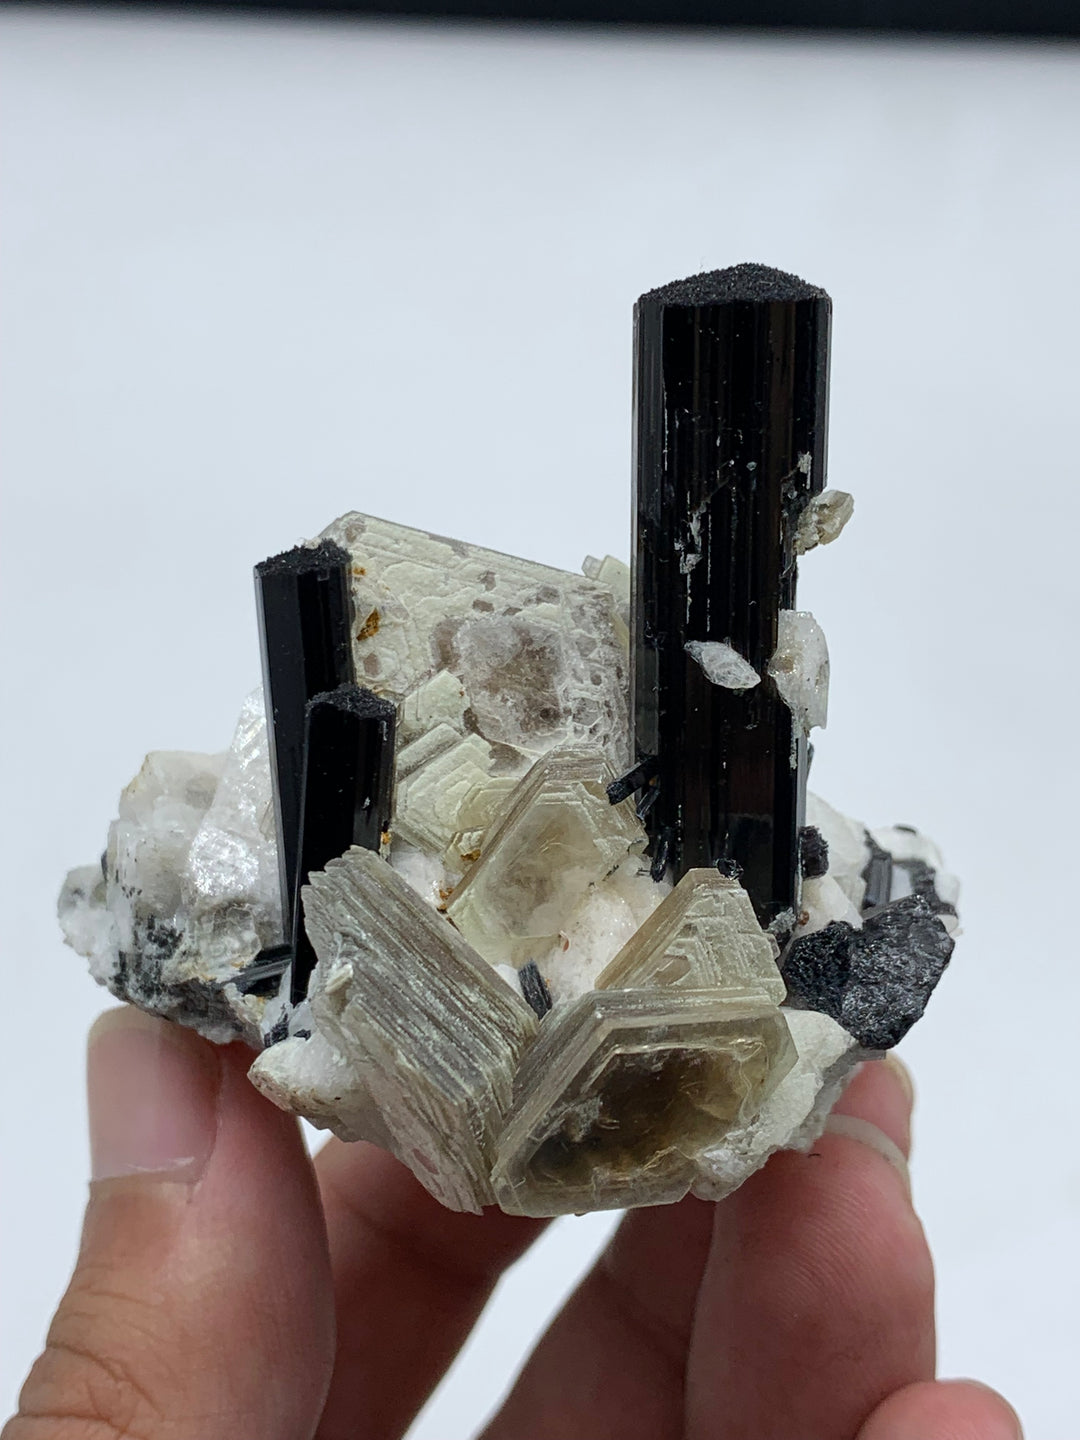 102.07 Grams Mesmerizing Black Tourmaline Specimen Attached With Muscovite